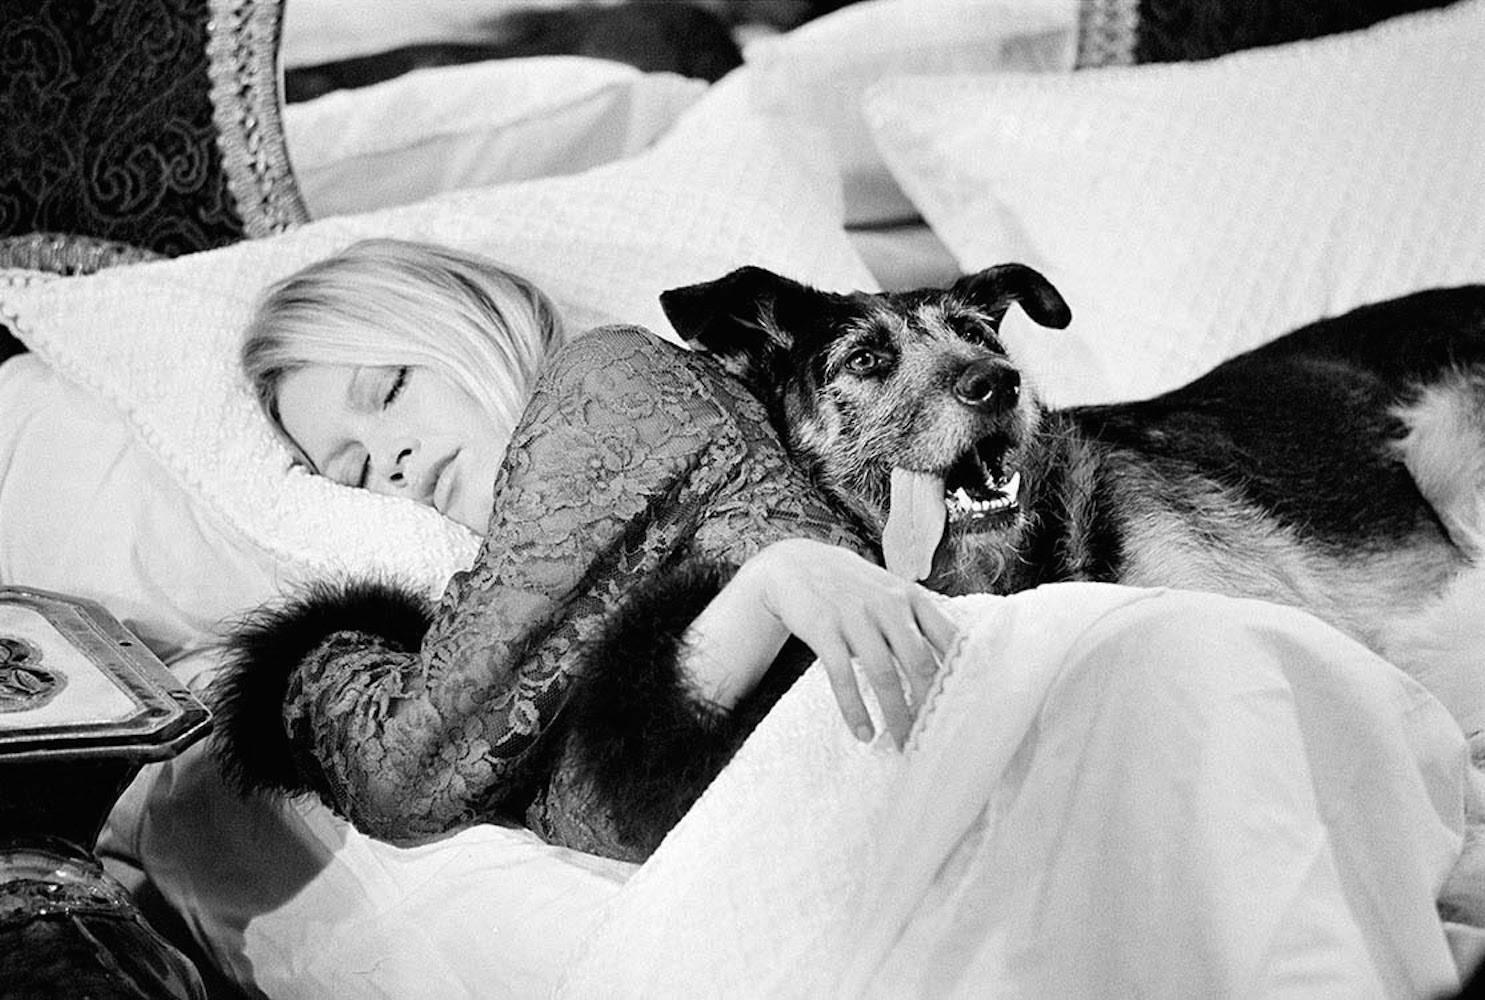 Terry O'Neill - Bardot with Dog, on set of Les Novices, 1970, Printed After